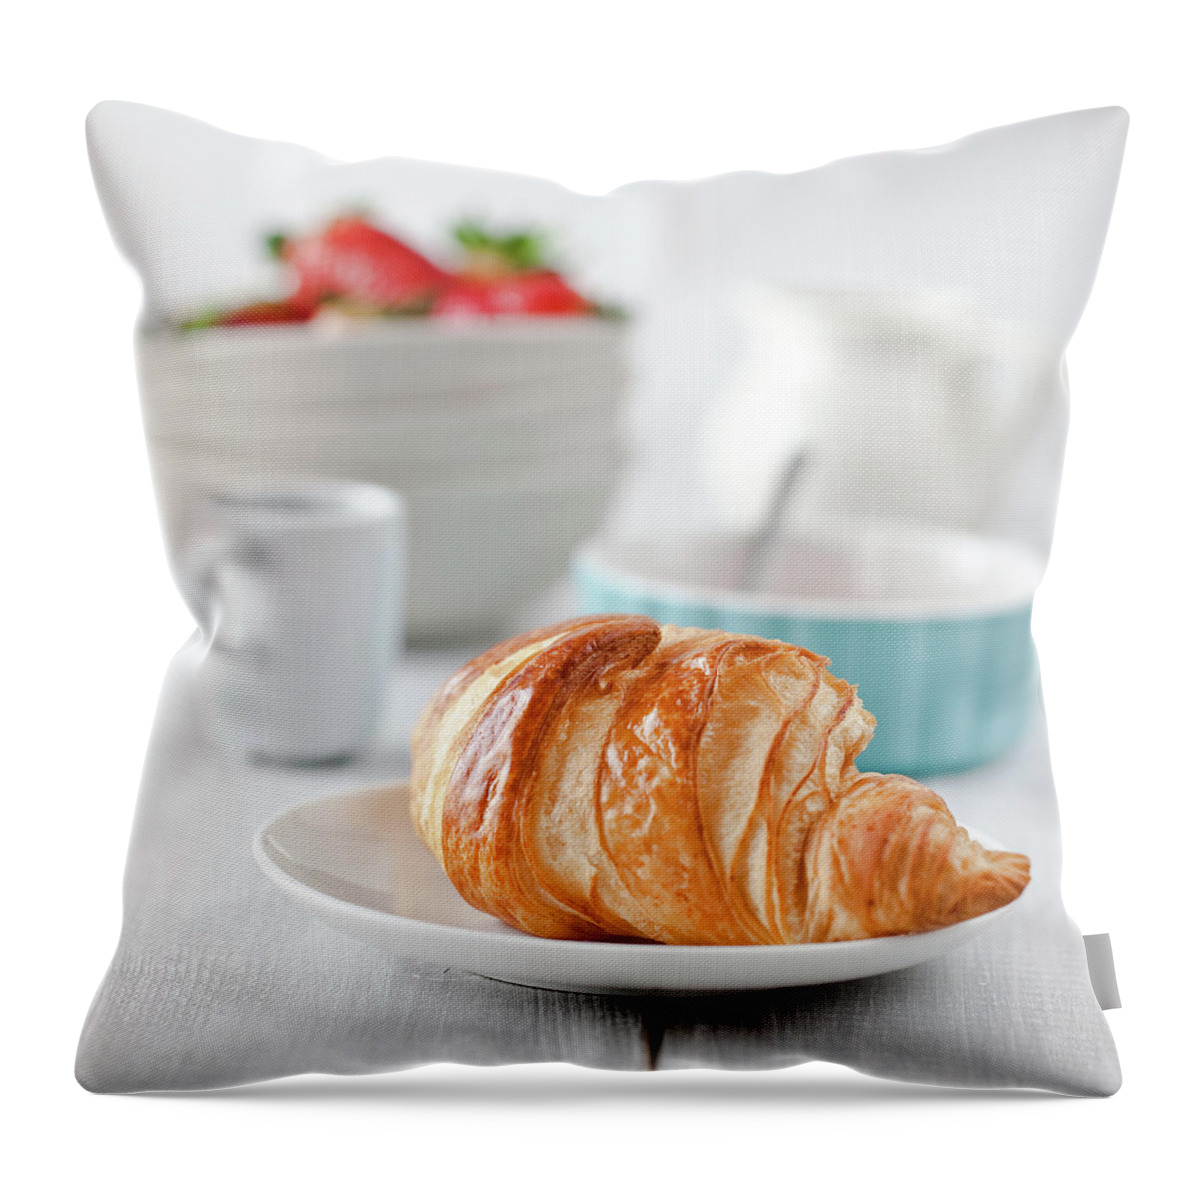 Breakfast Throw Pillow featuring the photograph Continental Breakfast With Coffee And by Ola p